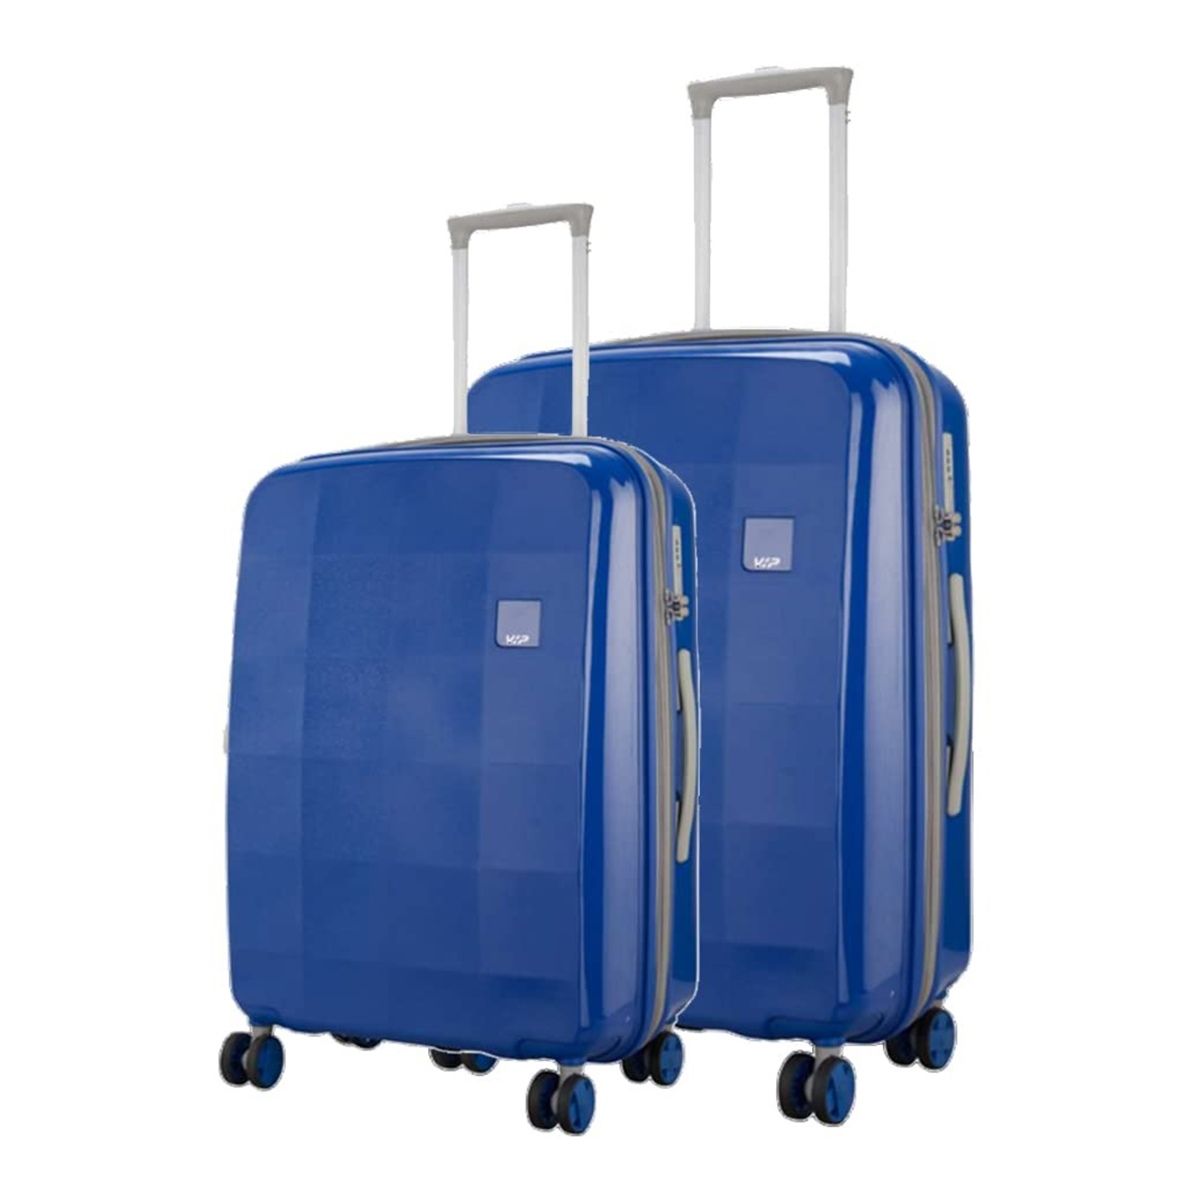 Shop Luggage Trolley Bags At Best Prices Online In India | Tata CLiQ